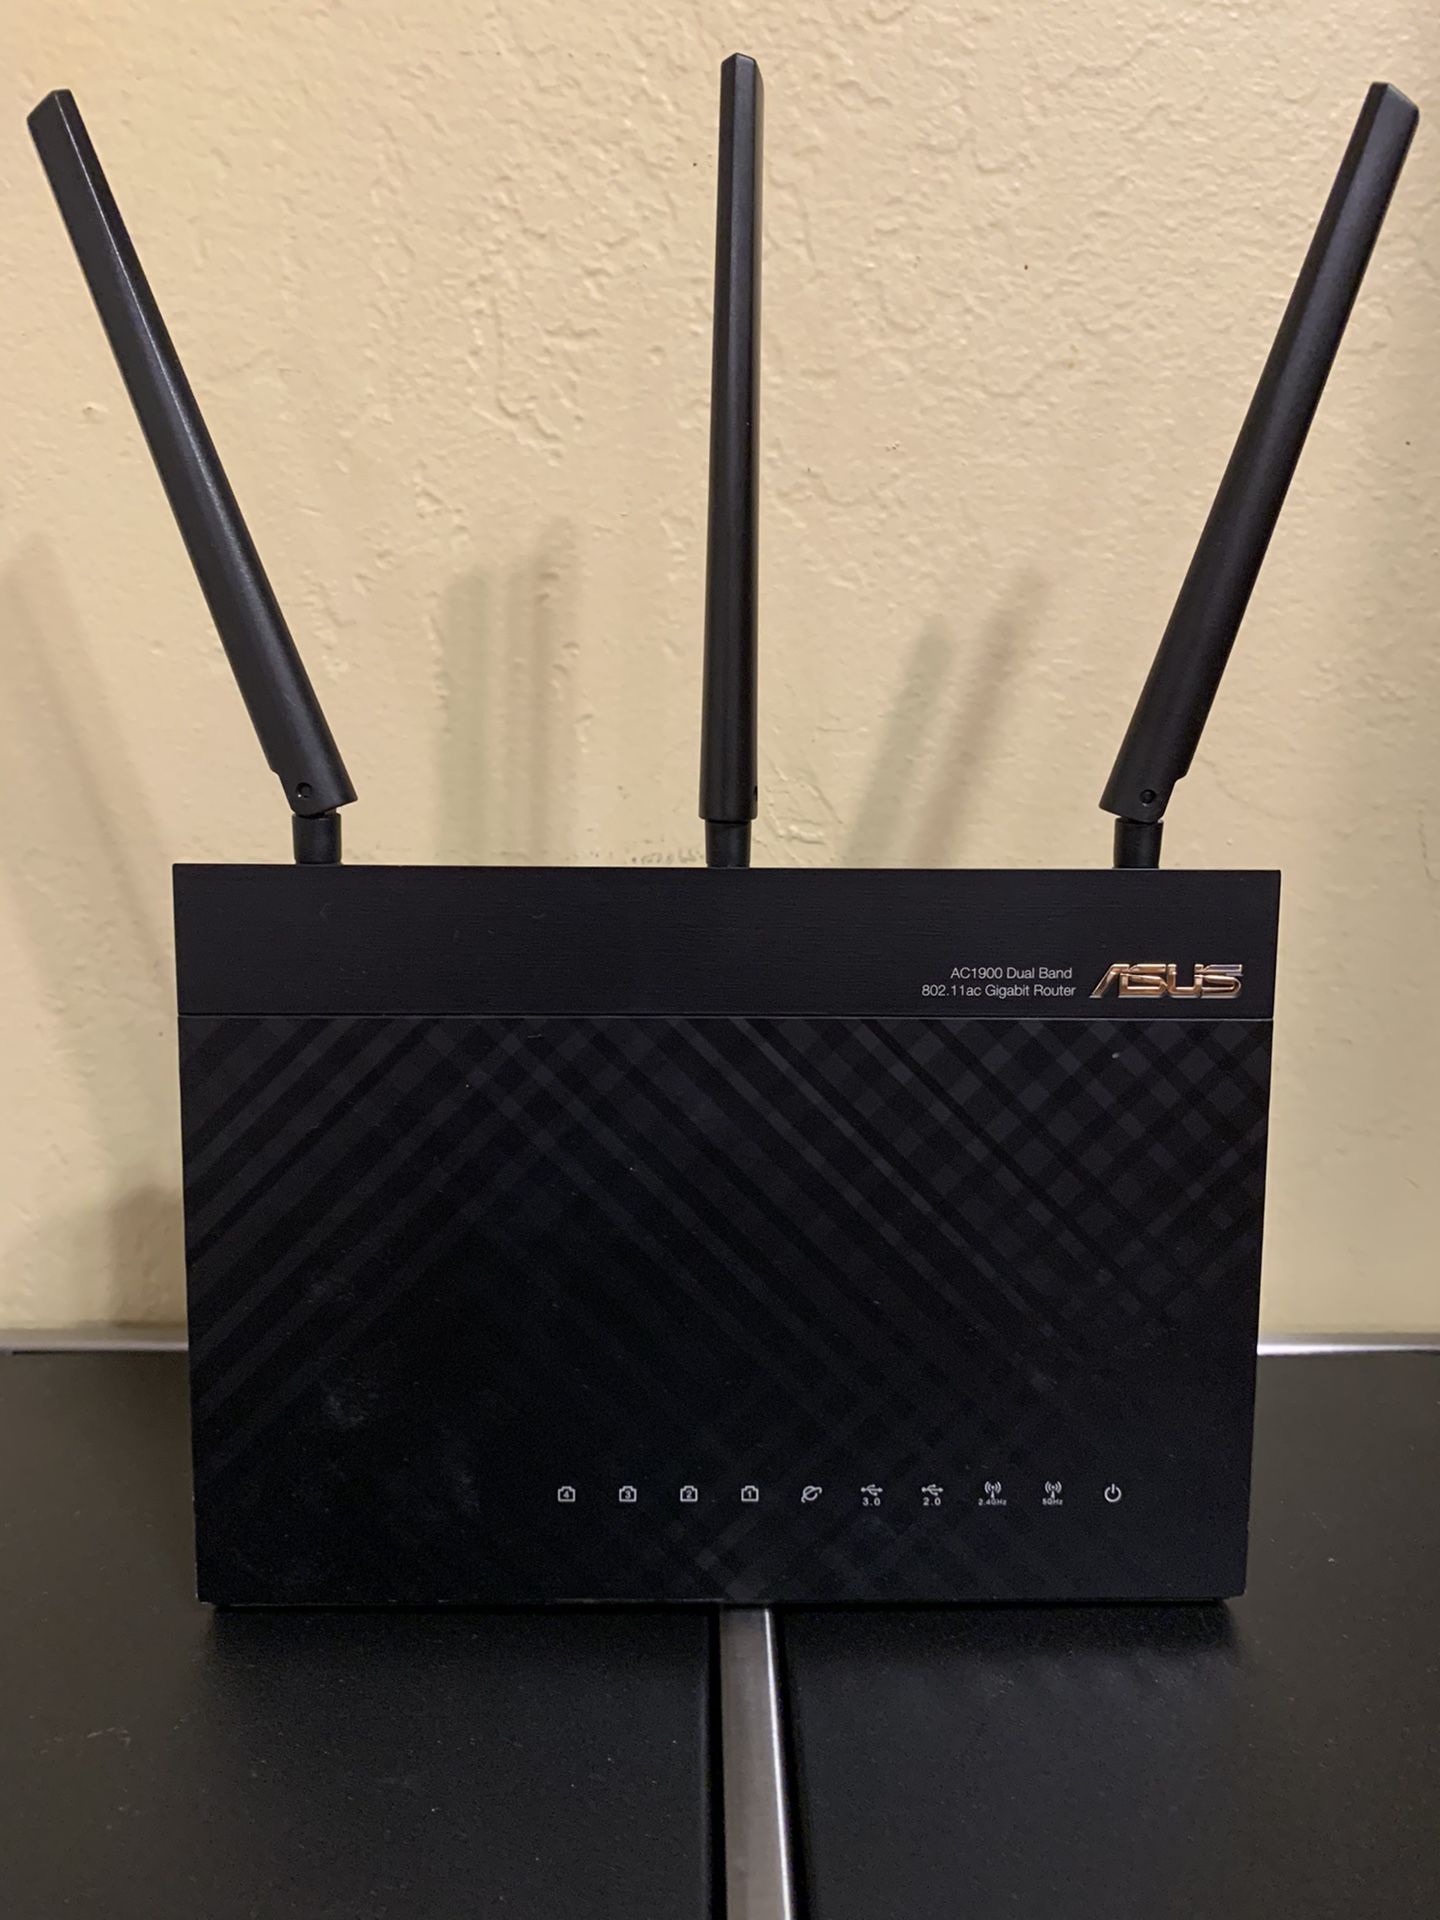 ASUS AC1900 Dual-band WiFi Router RT-AC68U